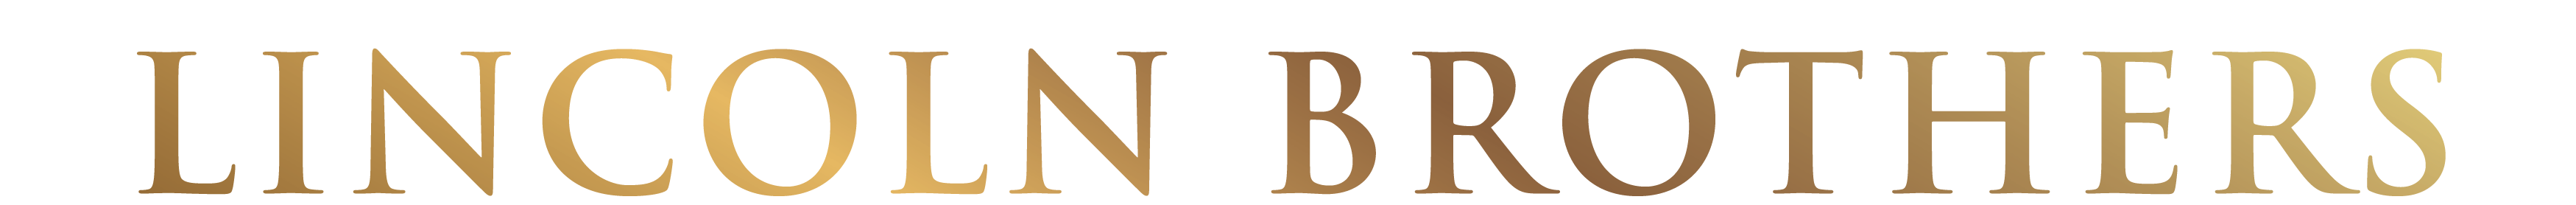 LINCOLN BROTHERS CO Logo